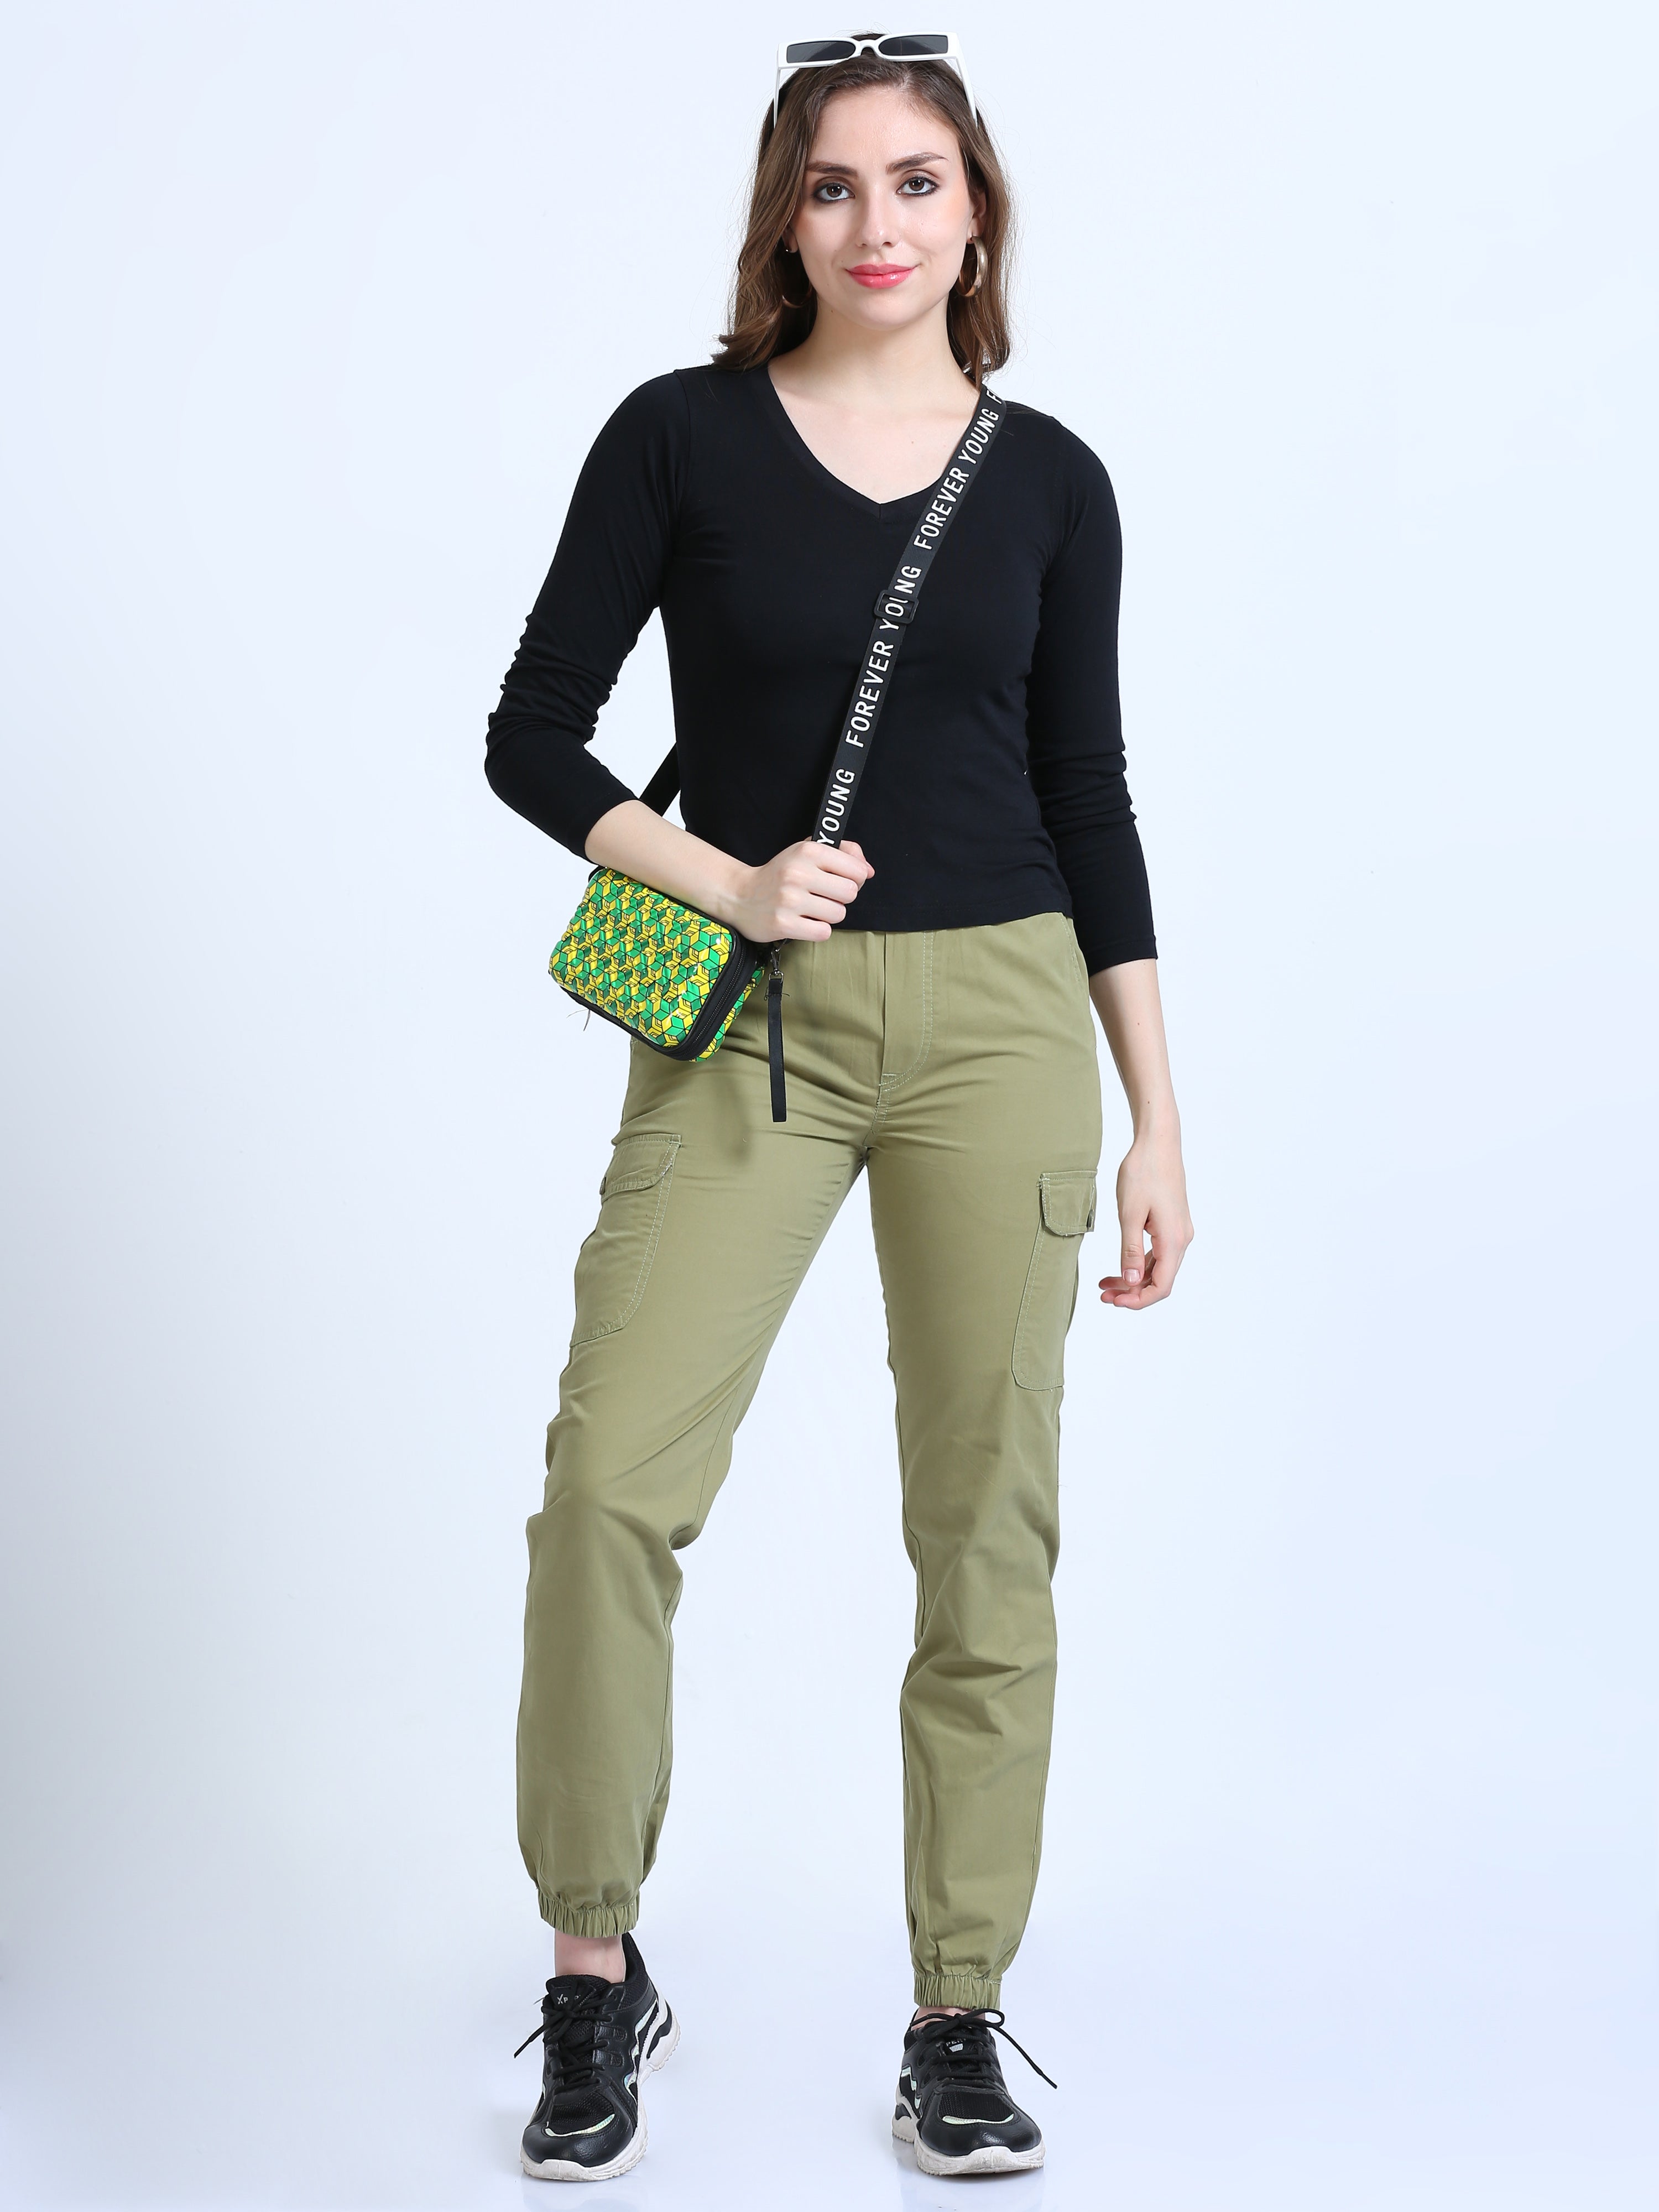 Three Olive Green Pants Outfits - Dressed Up and Down for Work and Casual  Style | Olive green pants outfit, Olive green pants, Olive pants outfit